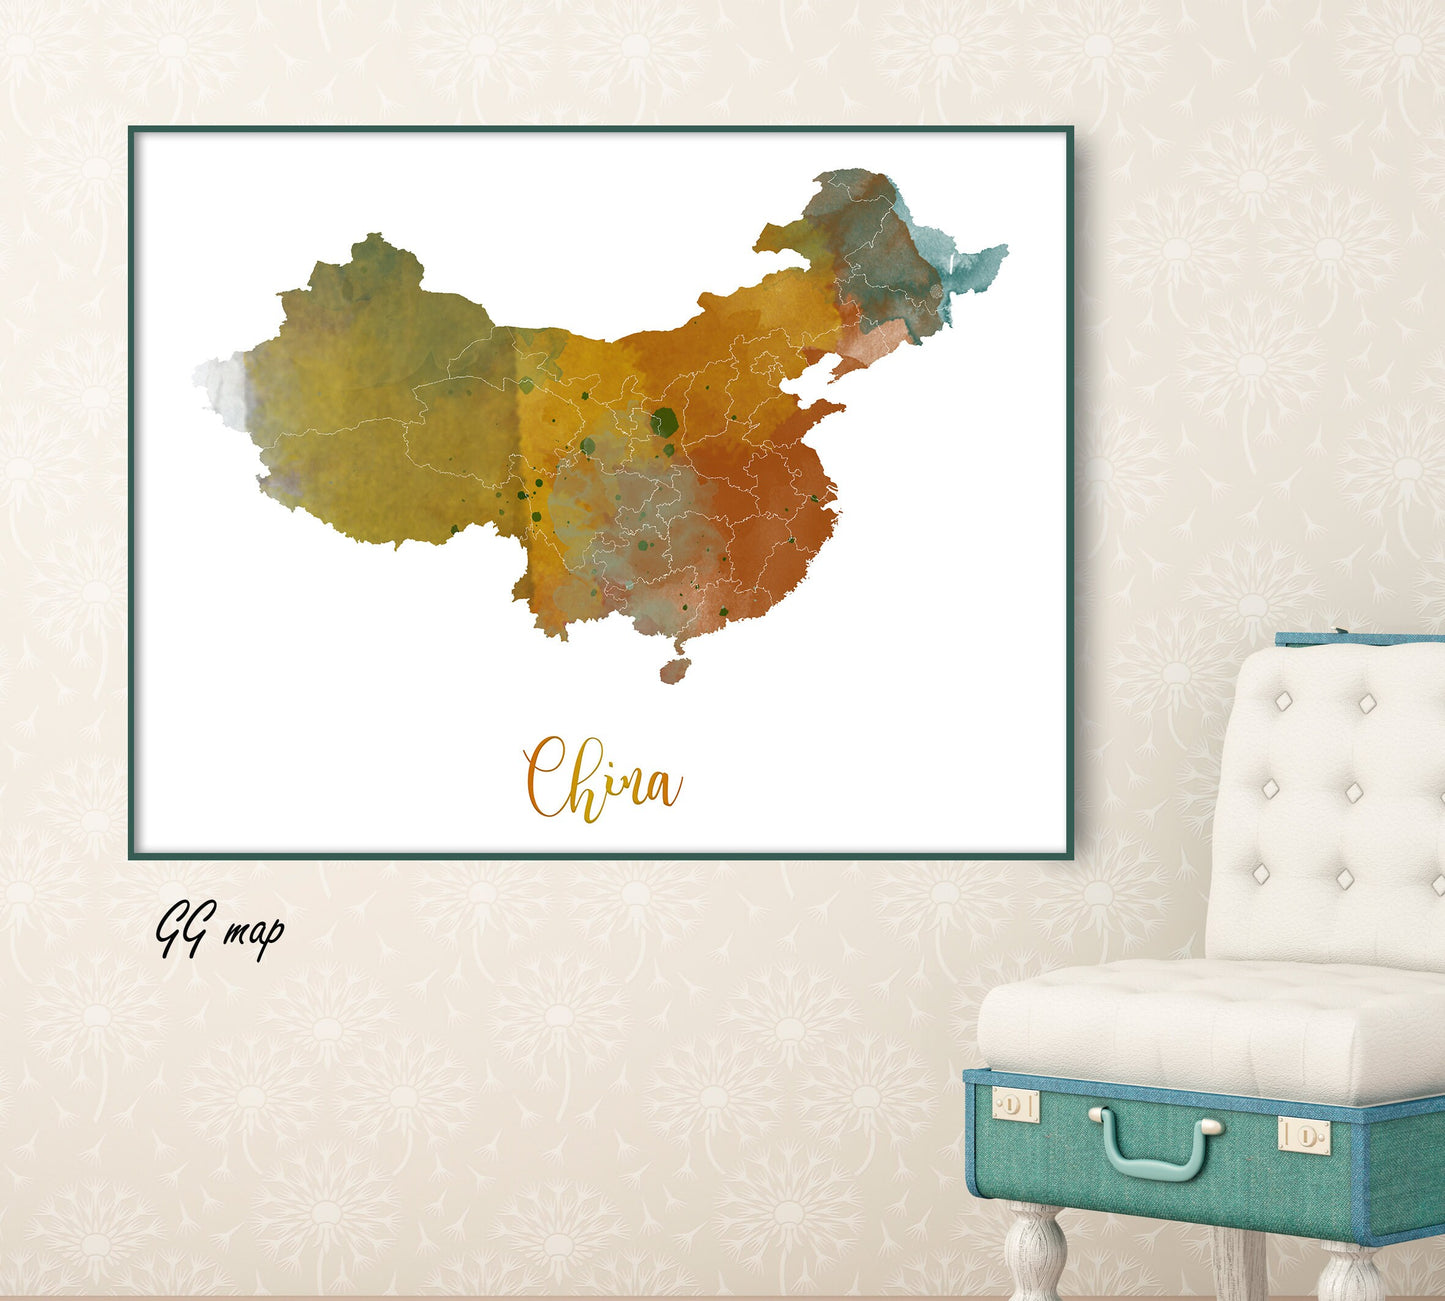 CHINA map - China watercolor map - Travel poster - Home Decor - Wall decor - Office map - China gift - GeoGIS studio